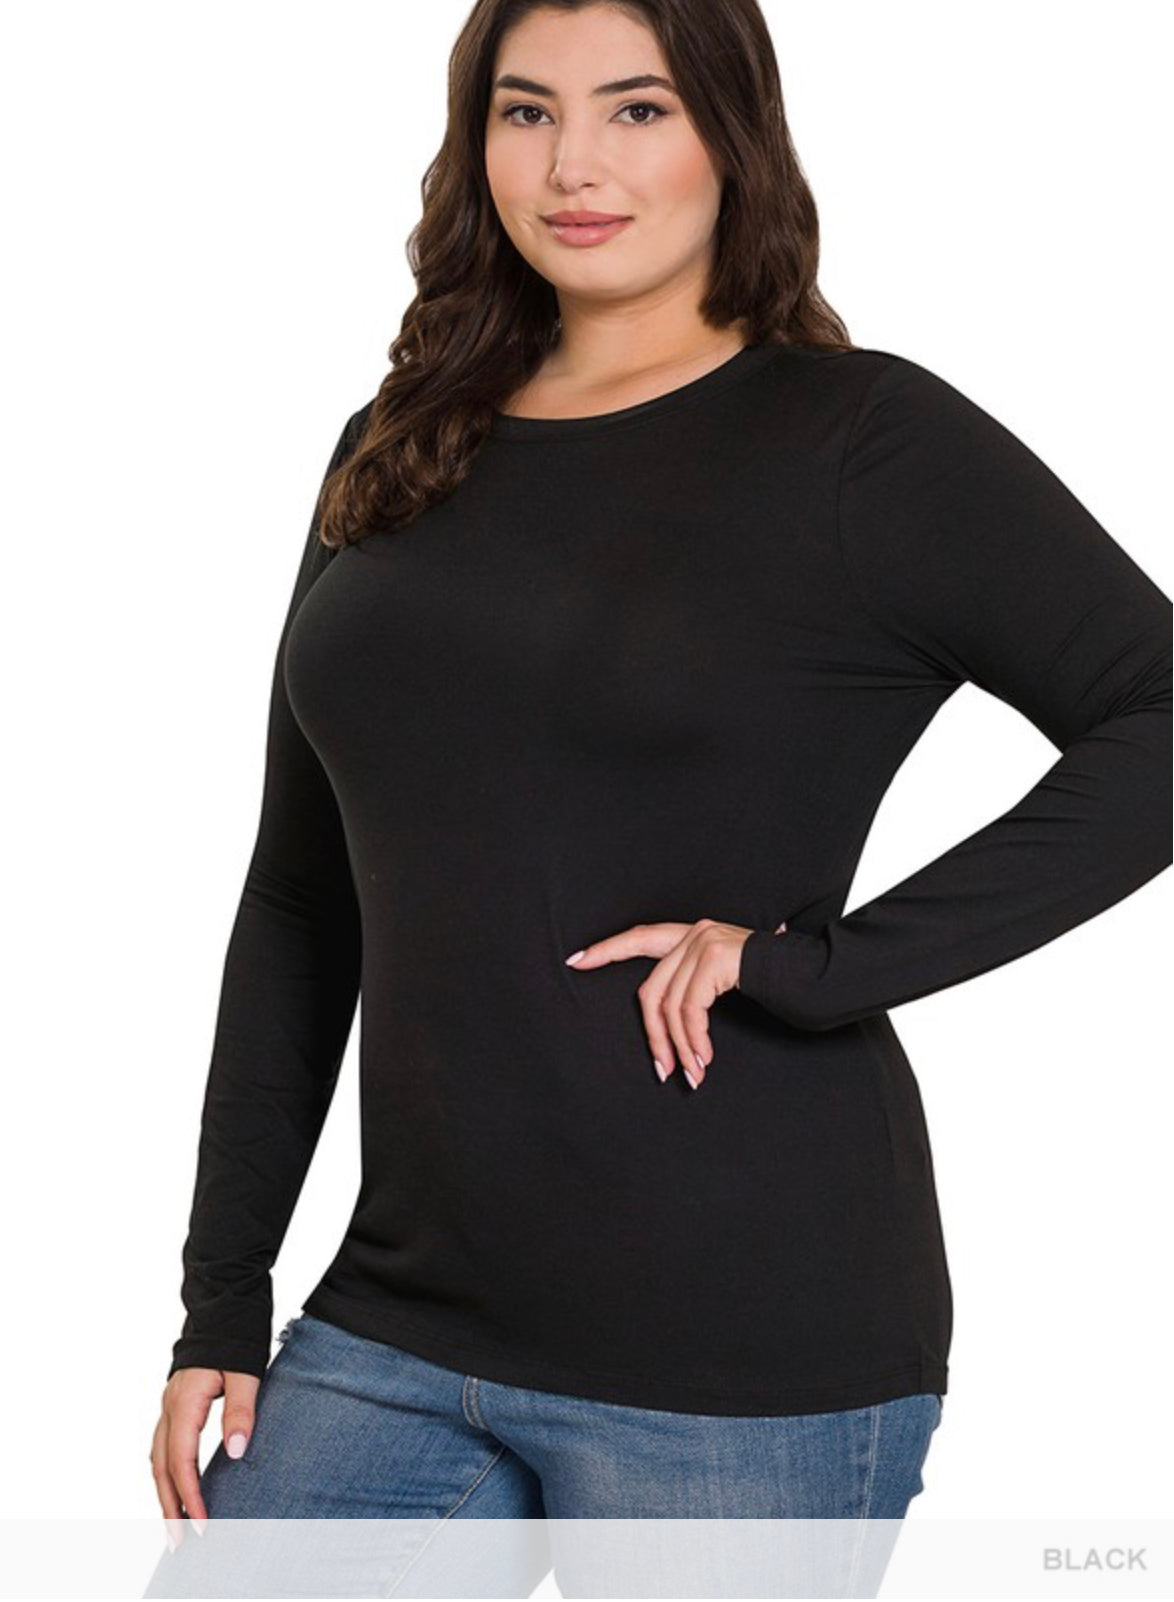 Black Long Sleeve Round Neck Layer Top